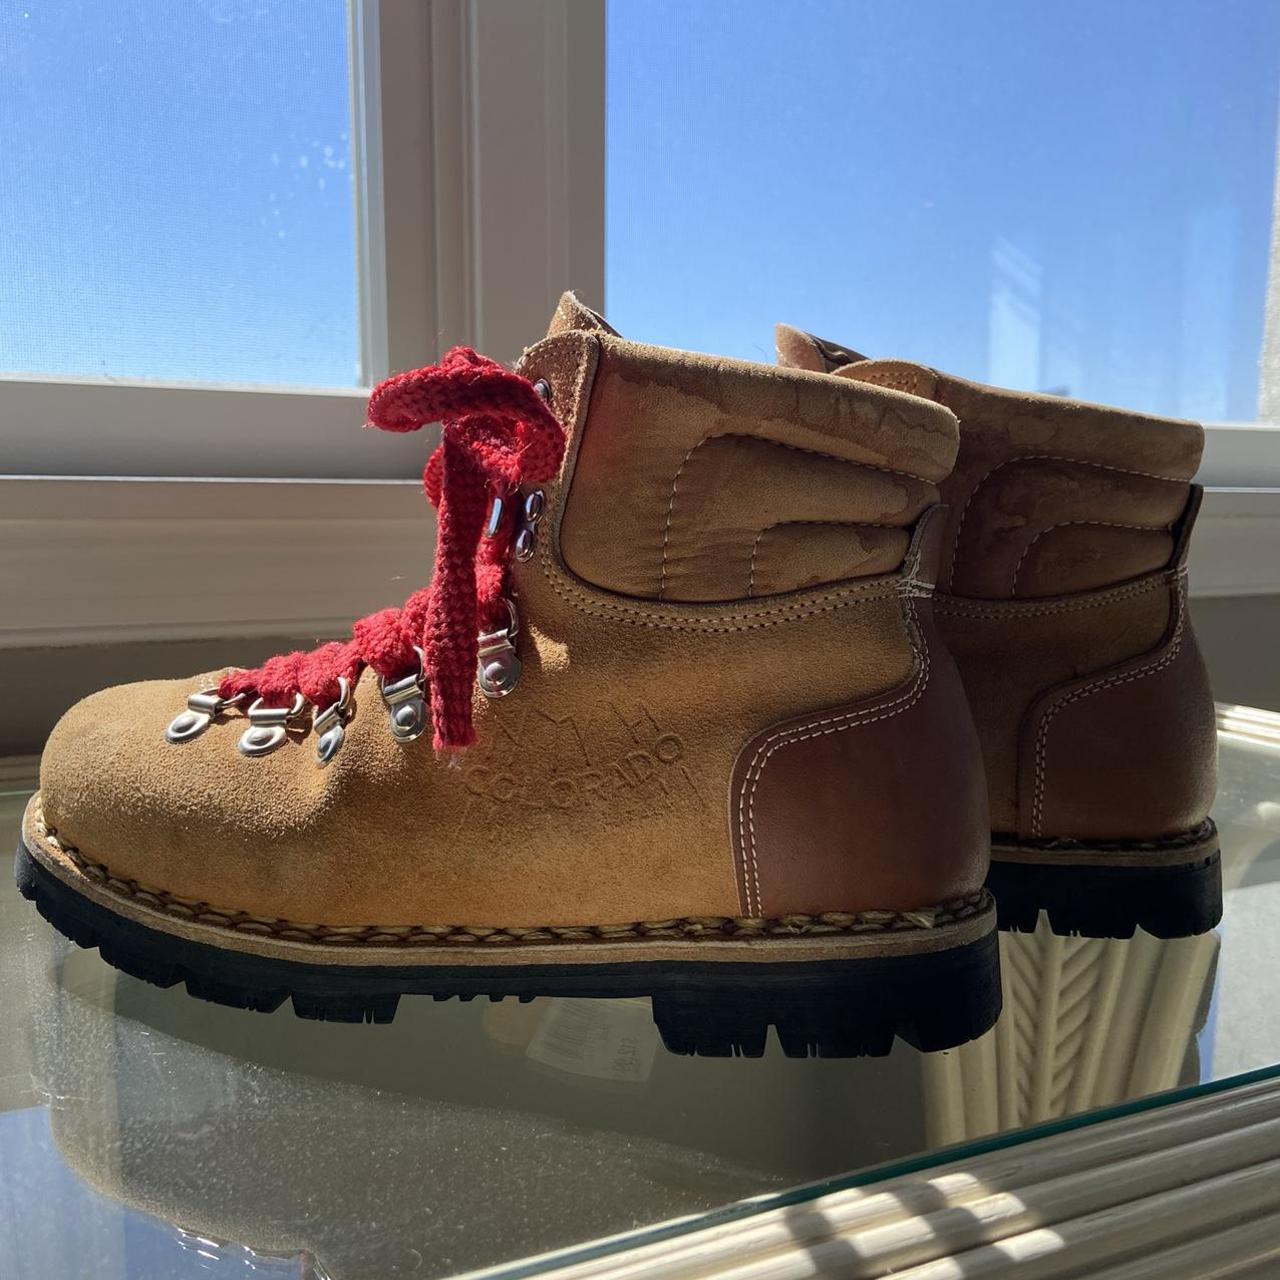 Women's Tan and Red Boots | Depop